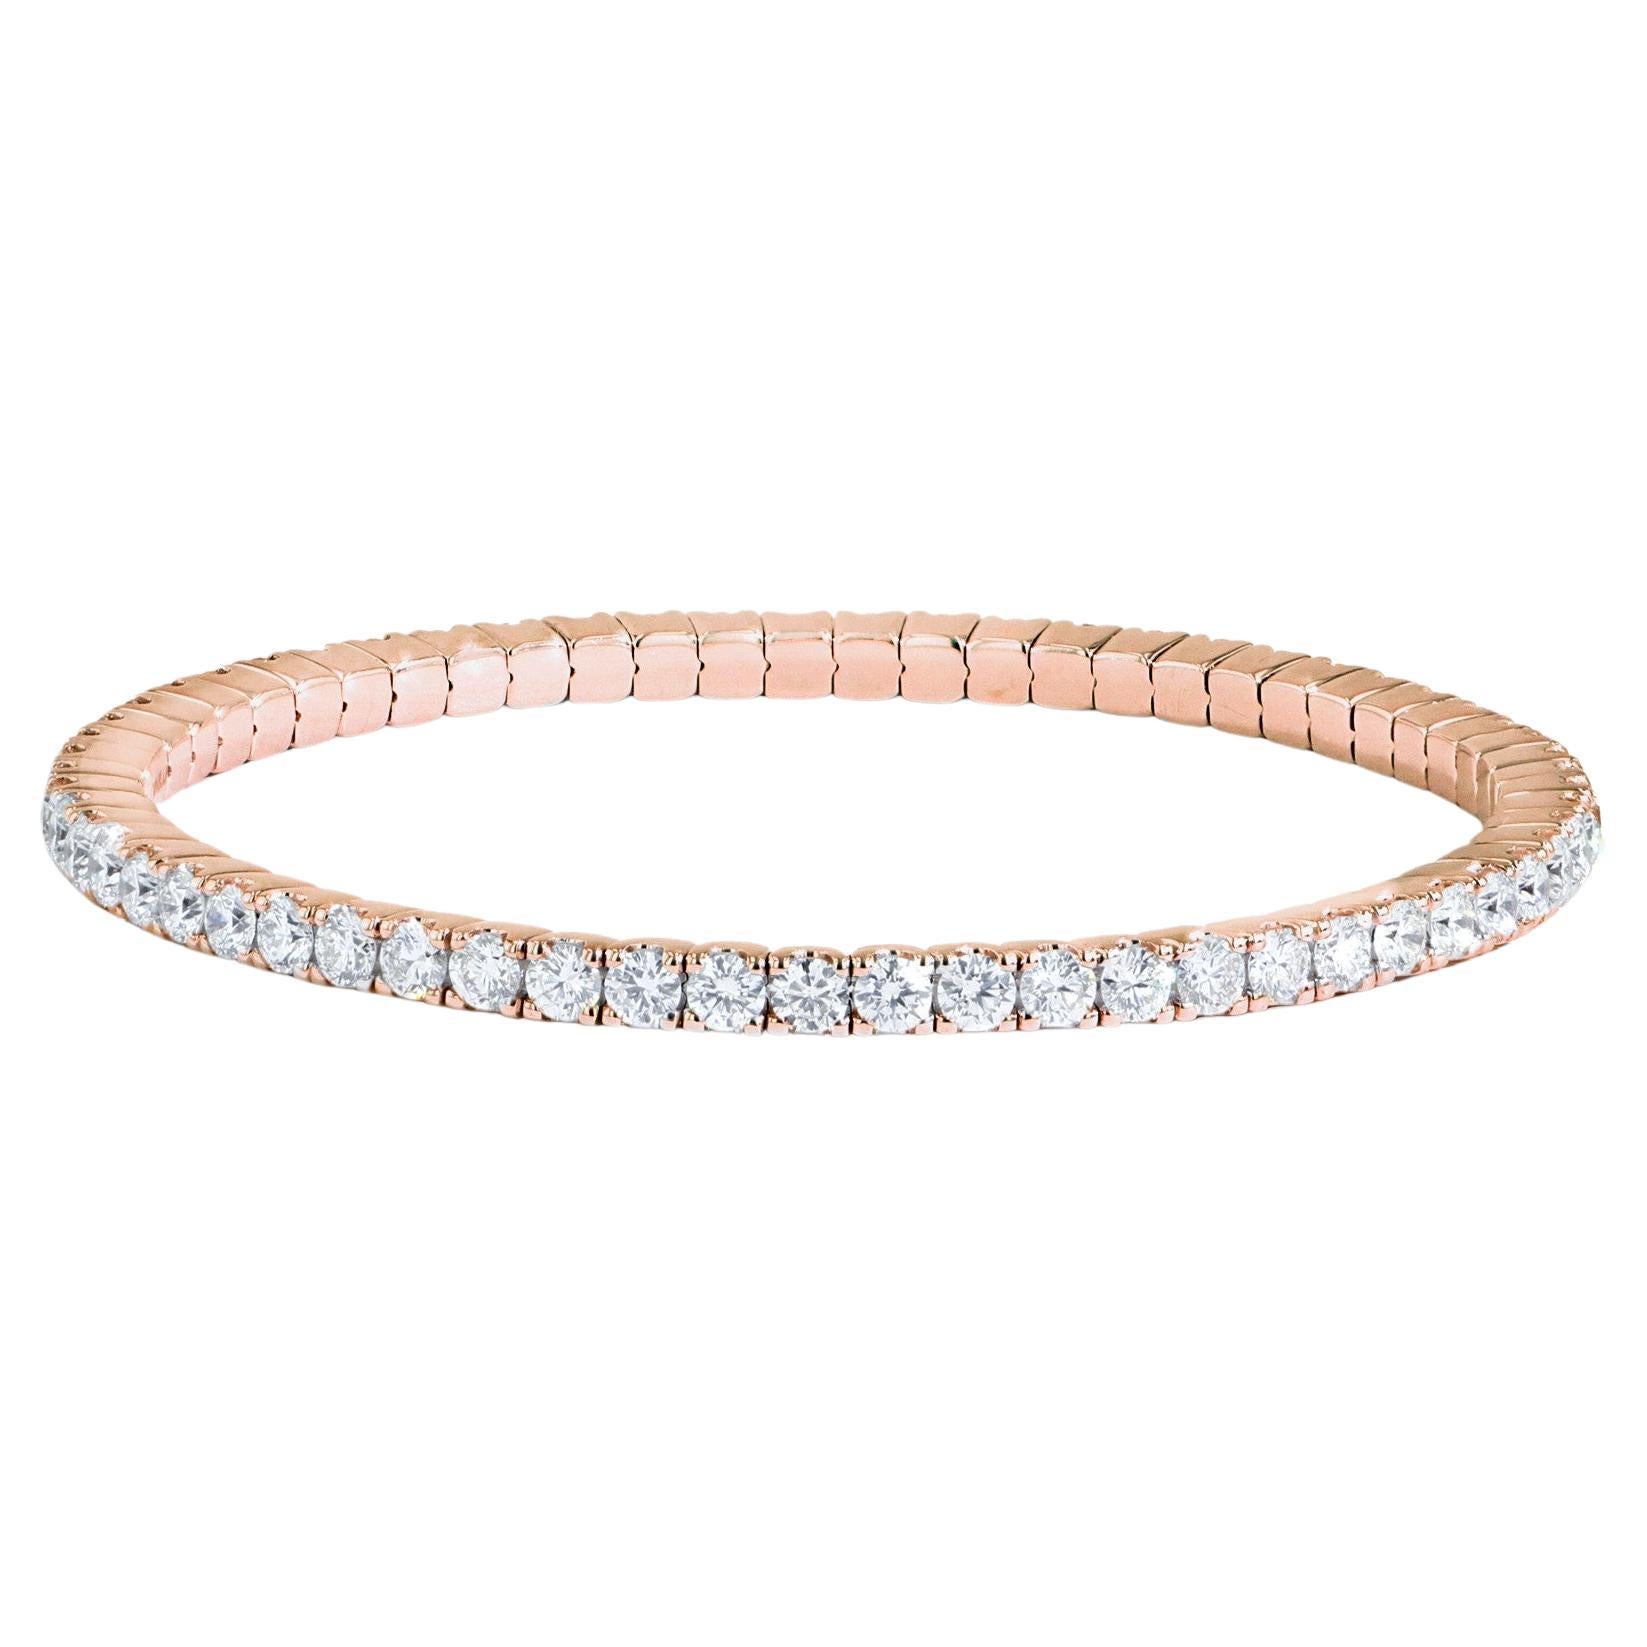 Iconic and stylish, this flexible diamond bangle bracelet is designed to make a statement. Crafted from 18K White, Yellow, or Rose Gold, with round brilliant cut diamonds, it effortlessly complements any outfit. Whether worn alone or stacked, it